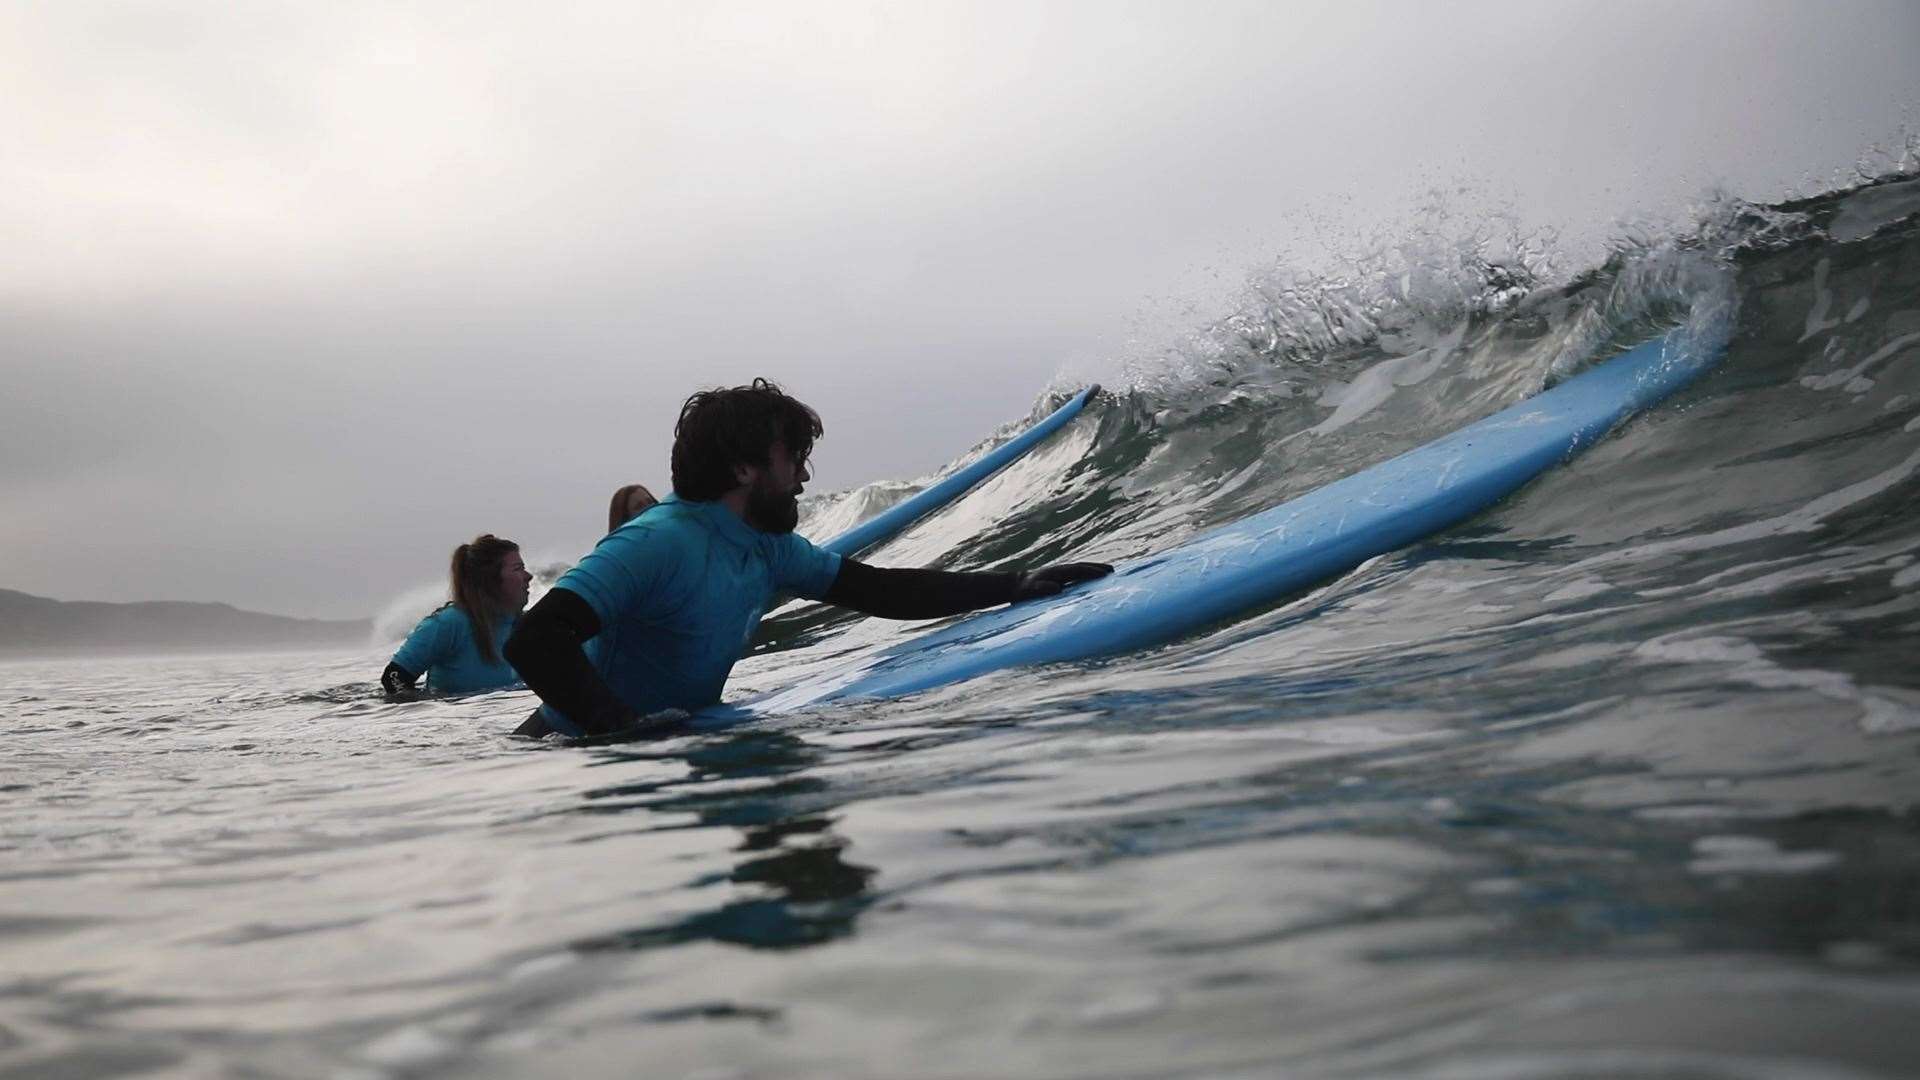 Surfing with North Coast Watersports, one of the activities that make the far north a year-round destination. Picture: Venture North